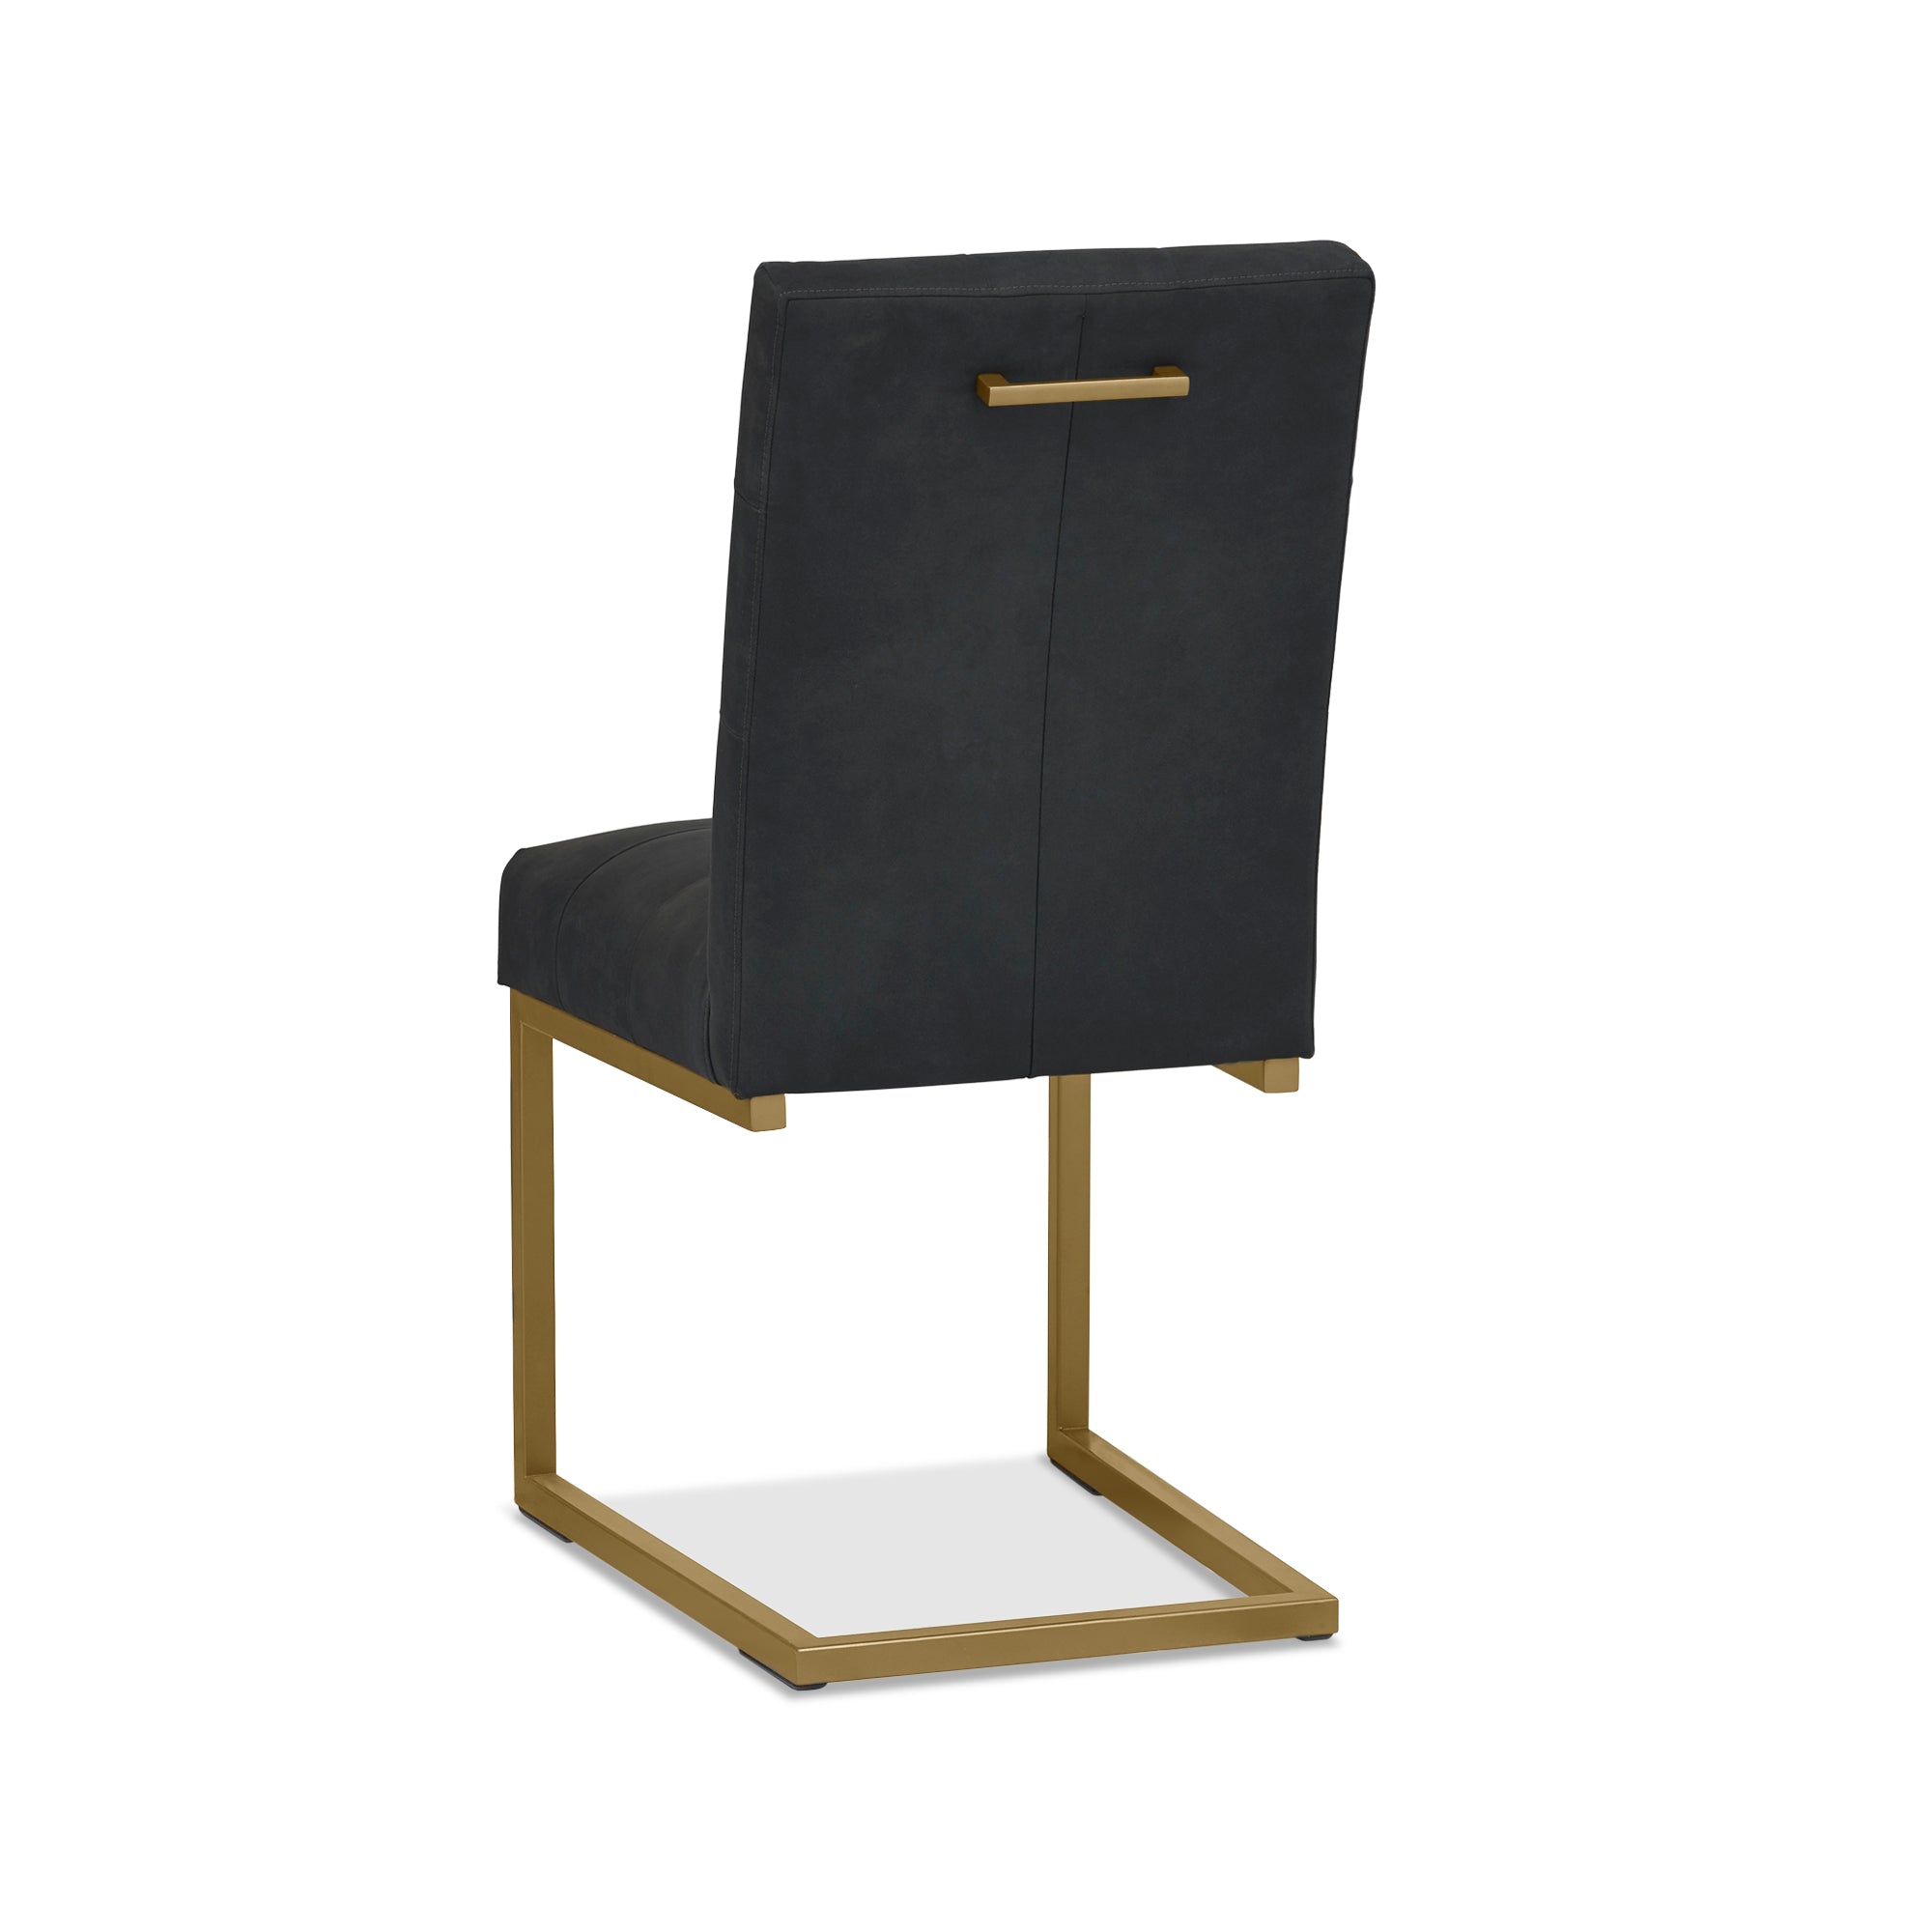 Lindos Fumed Oak Upholstered Cantilever Chair - Black Fabric (Pair)